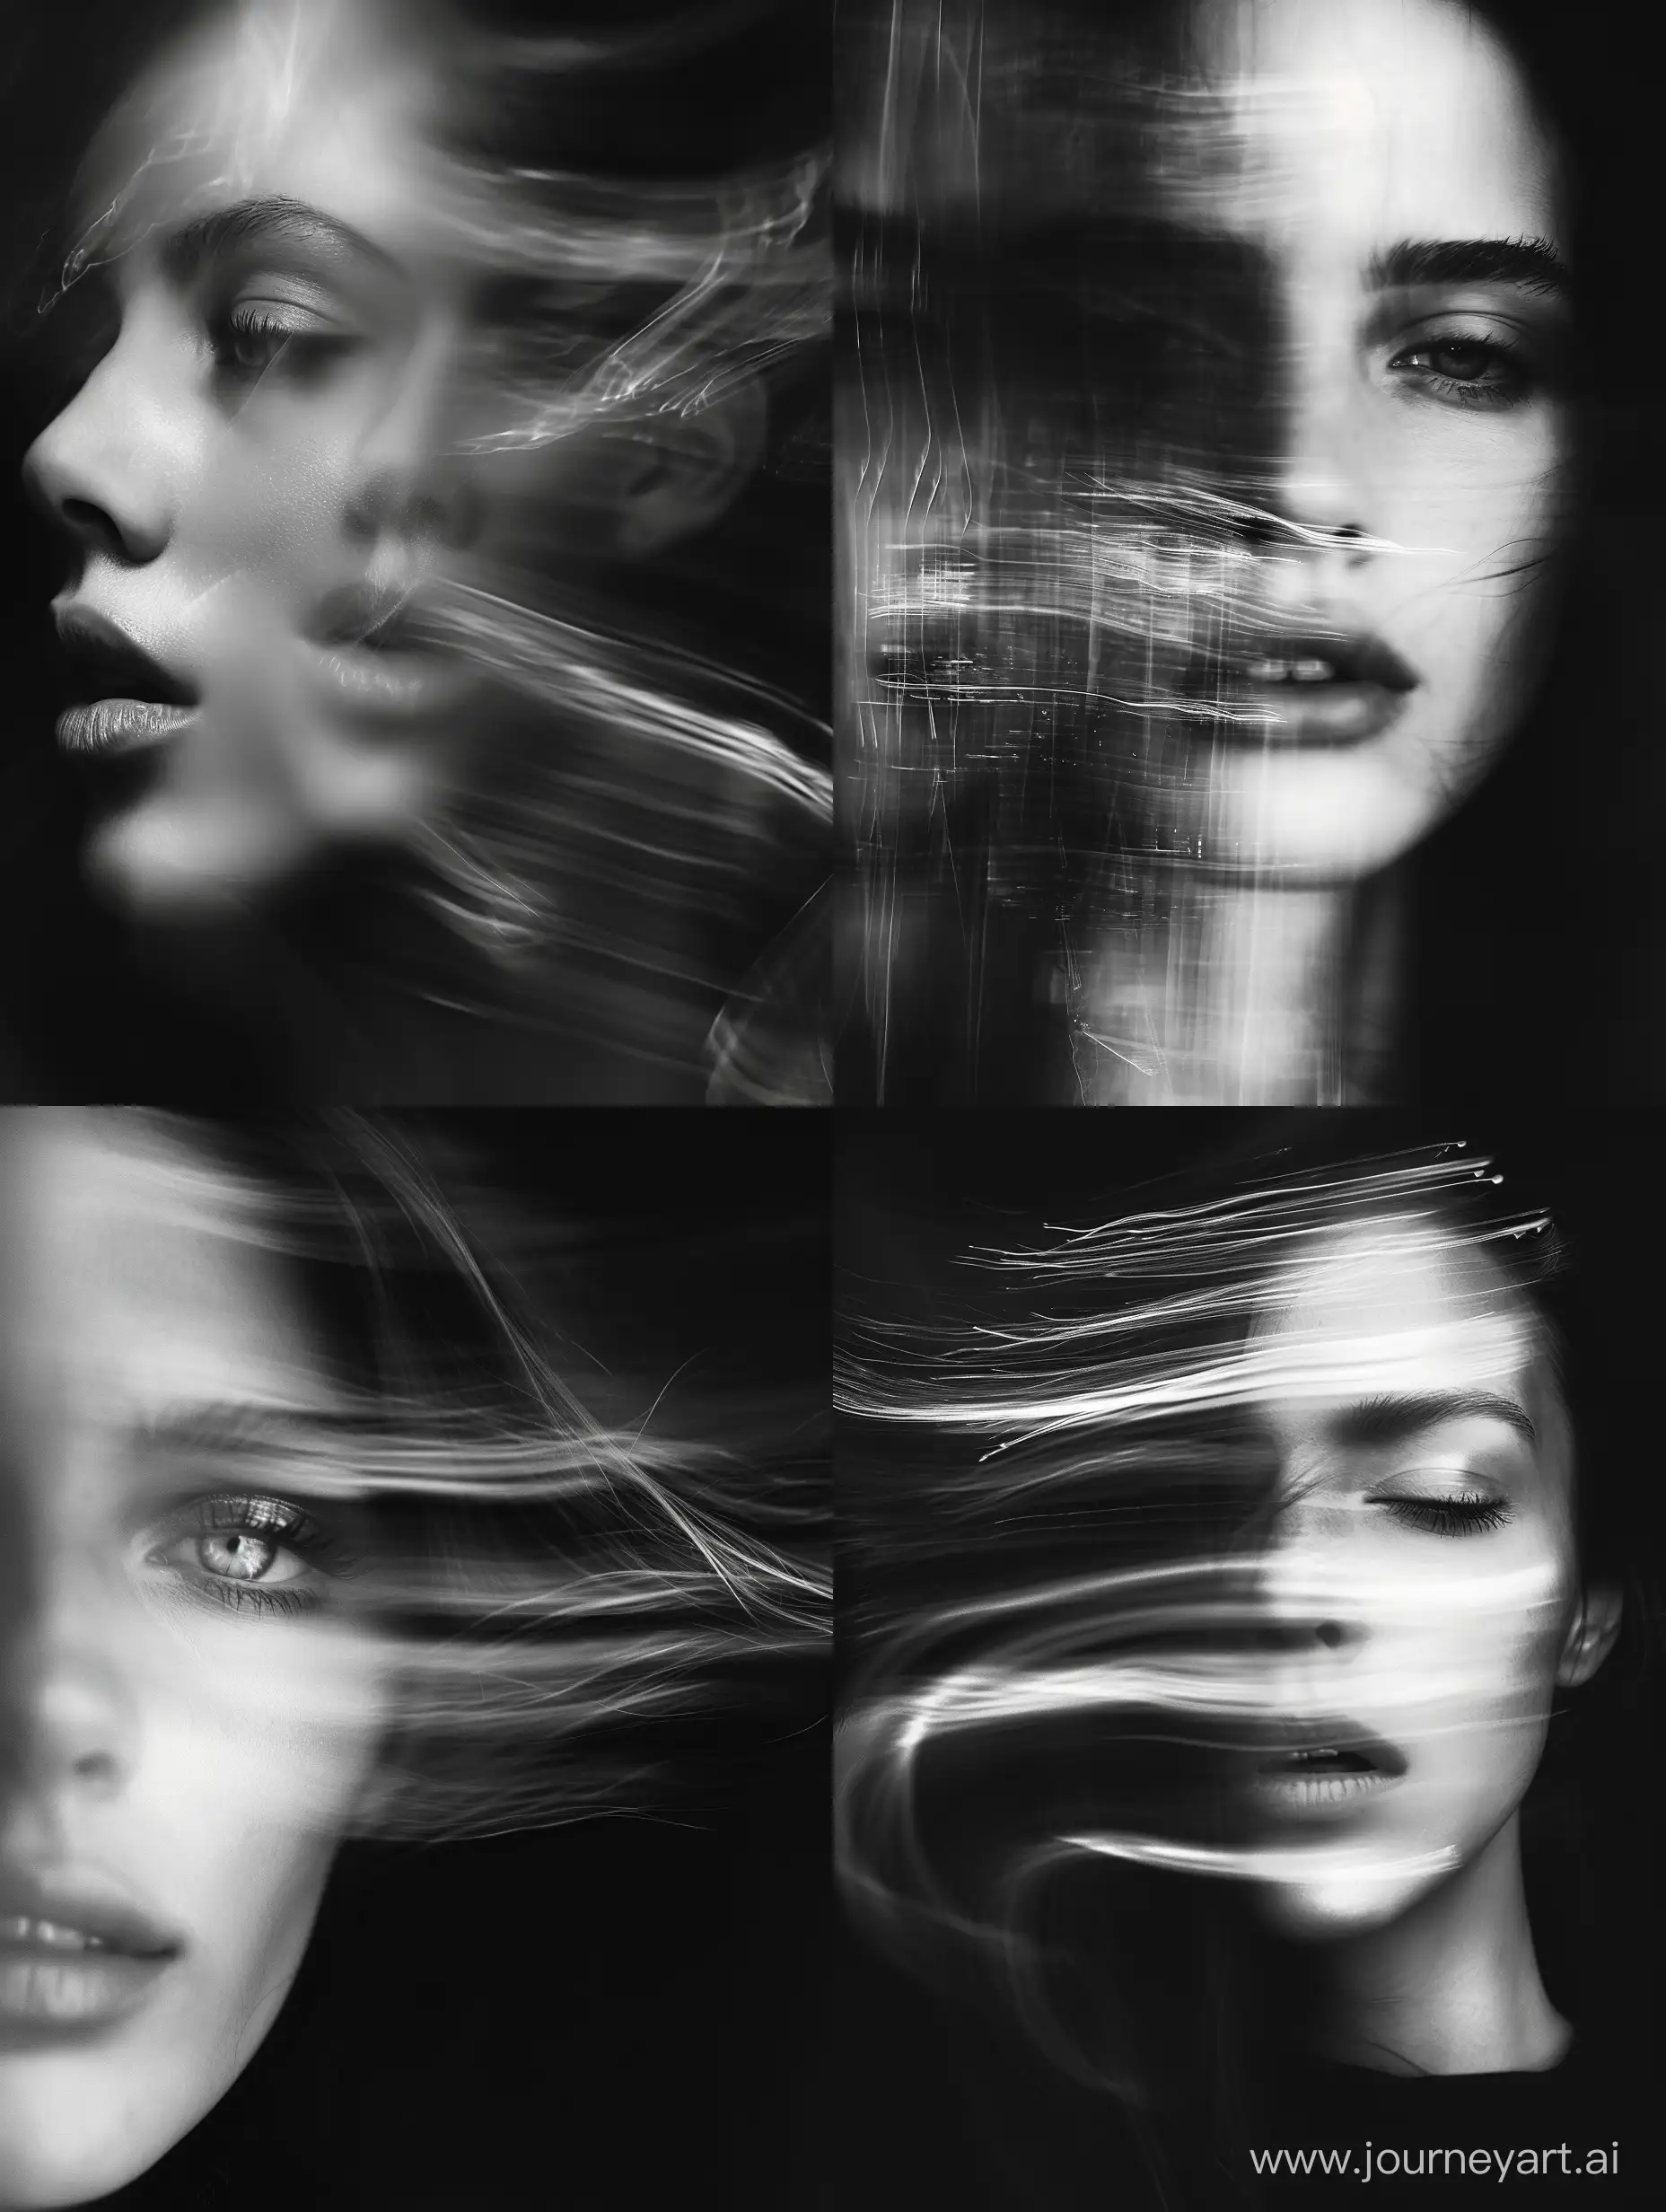 Ethereal-Black-and-White-Female-Portrait-with-Blurred-Photographic-Effect